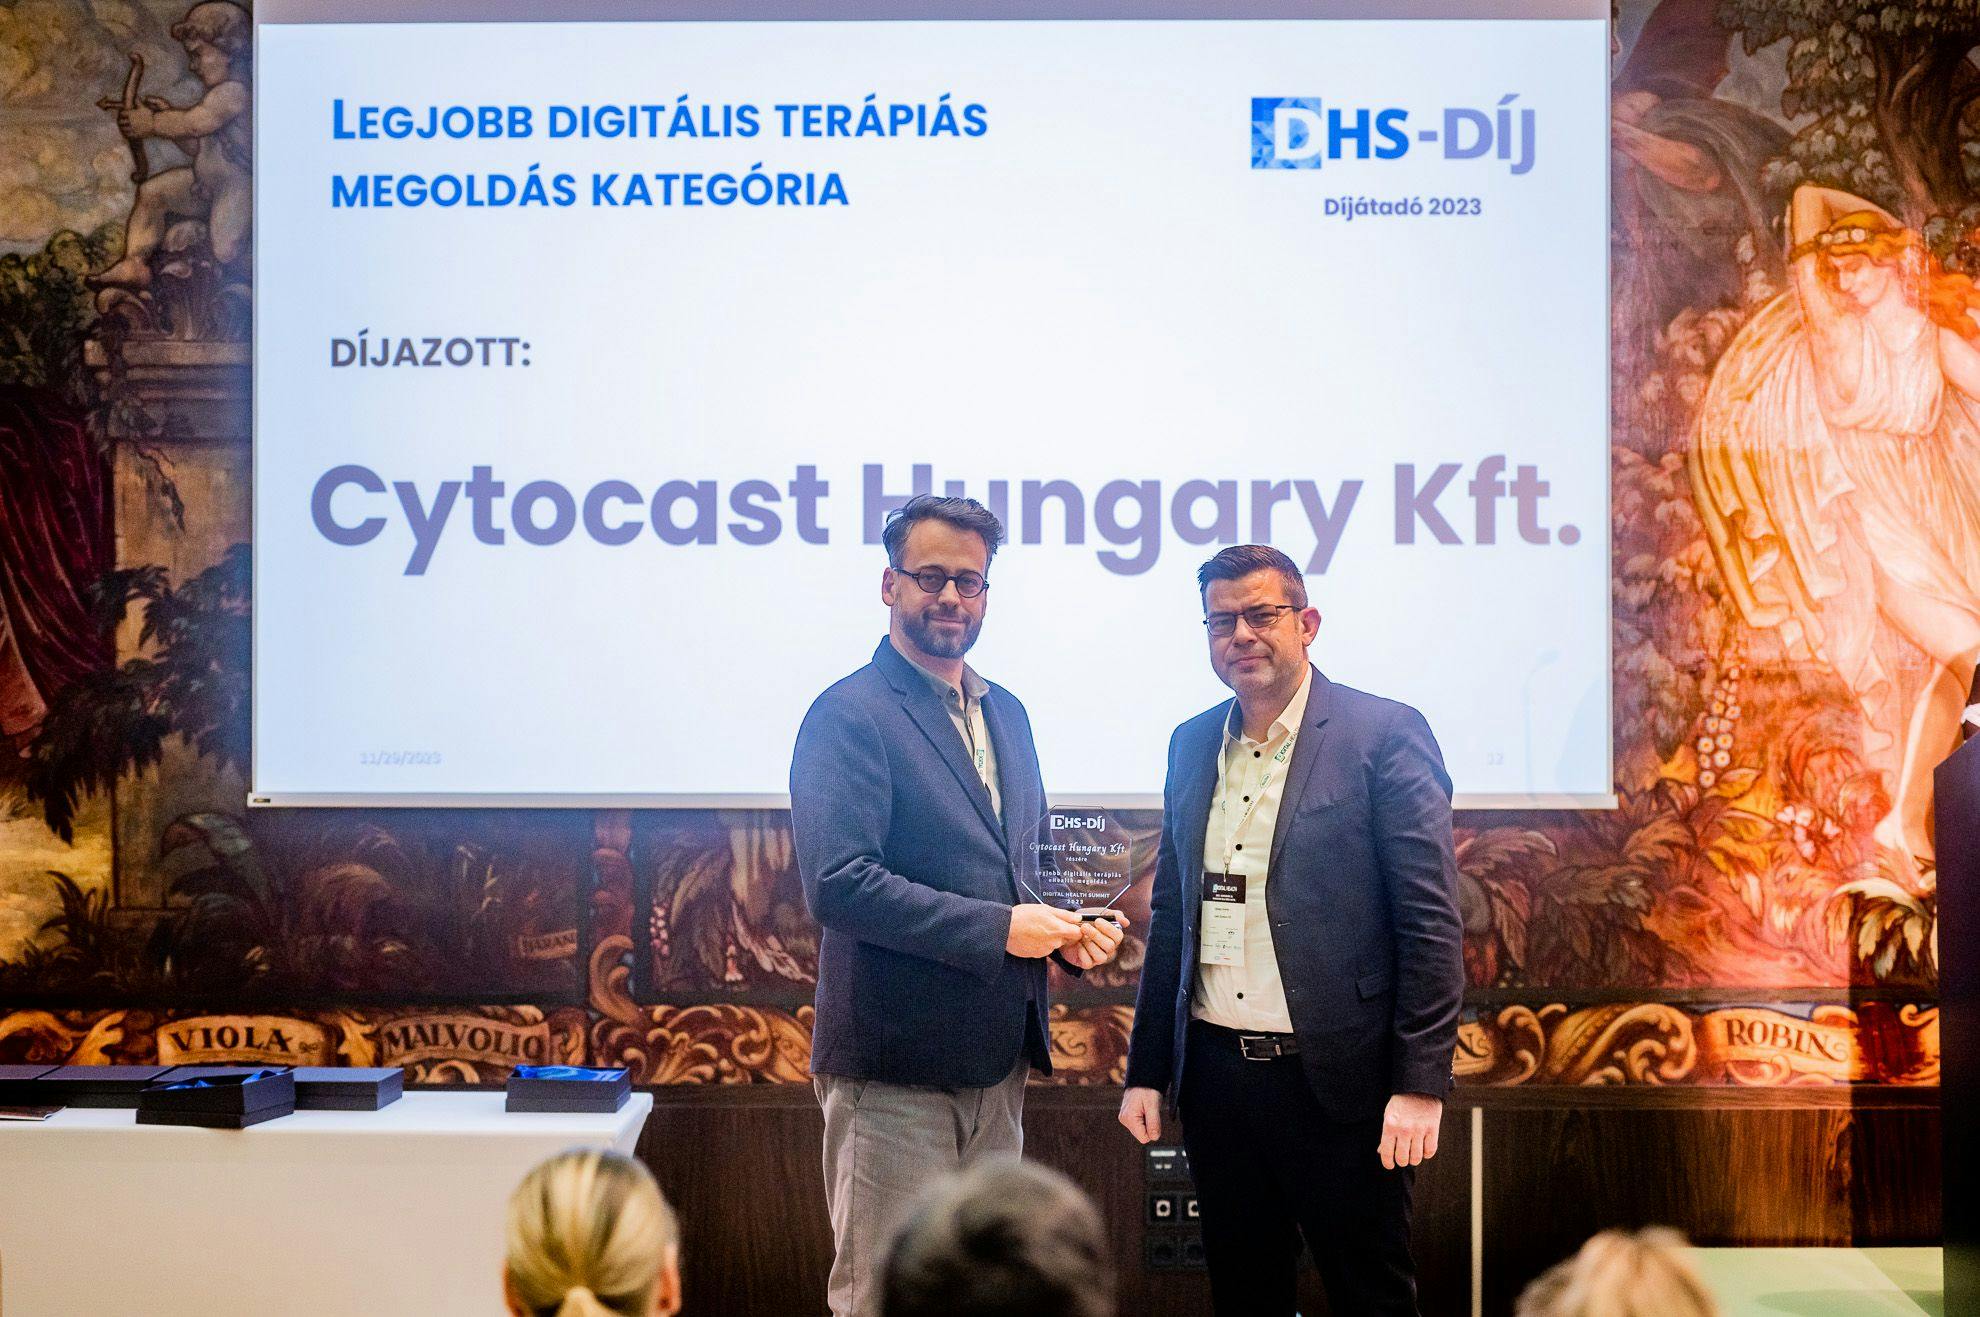 Best Solution in the Digital Therapy - 4th Digital Summit Award